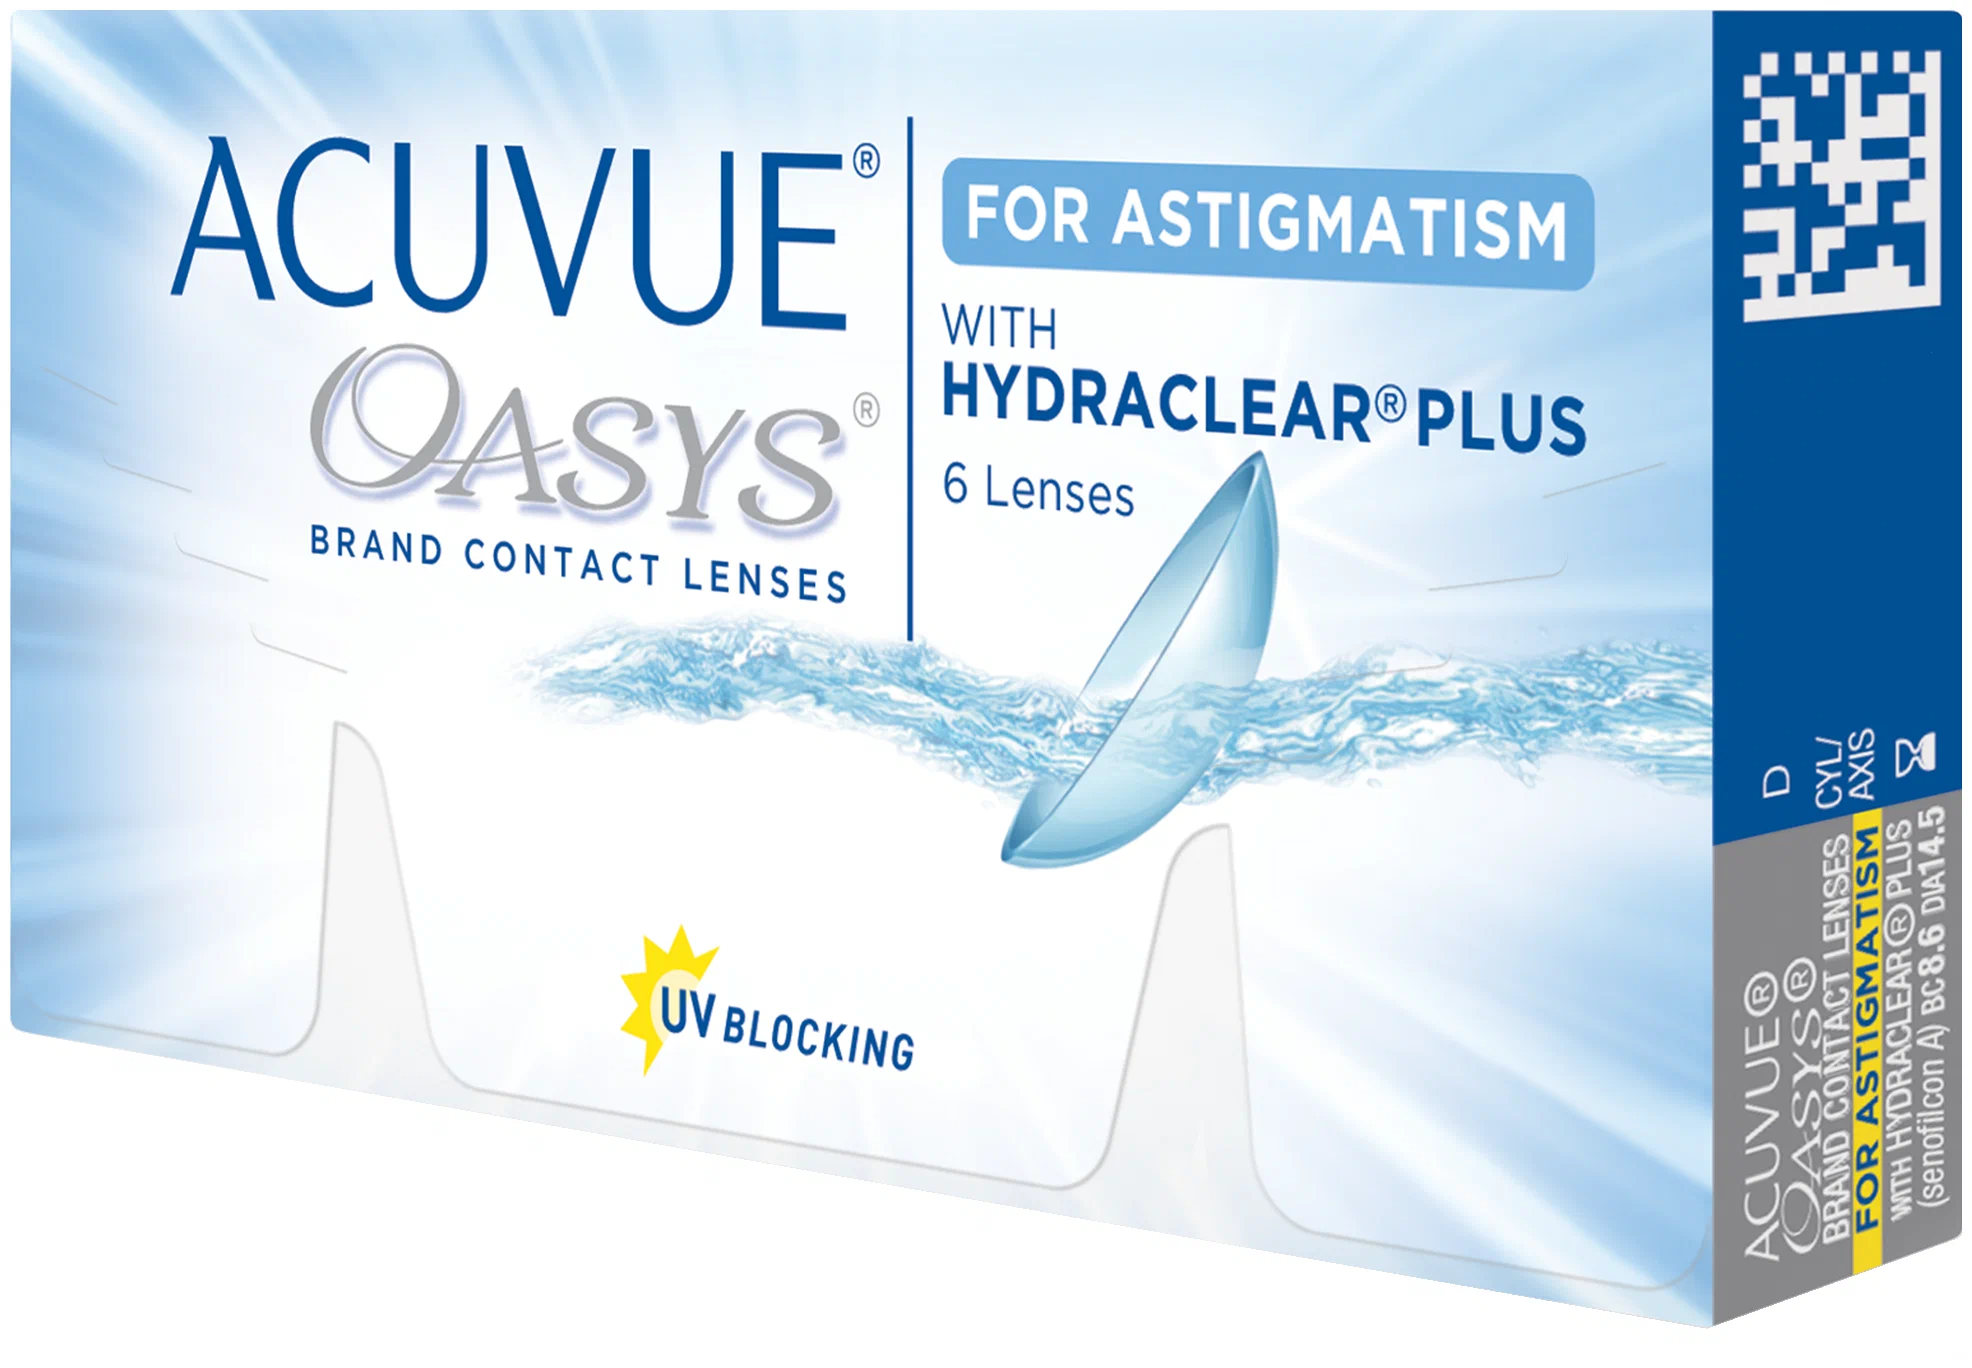 Acuvue OASYS for Astigmatism with Hydraclear Plus, 6 шт. - тип линз: астигматические